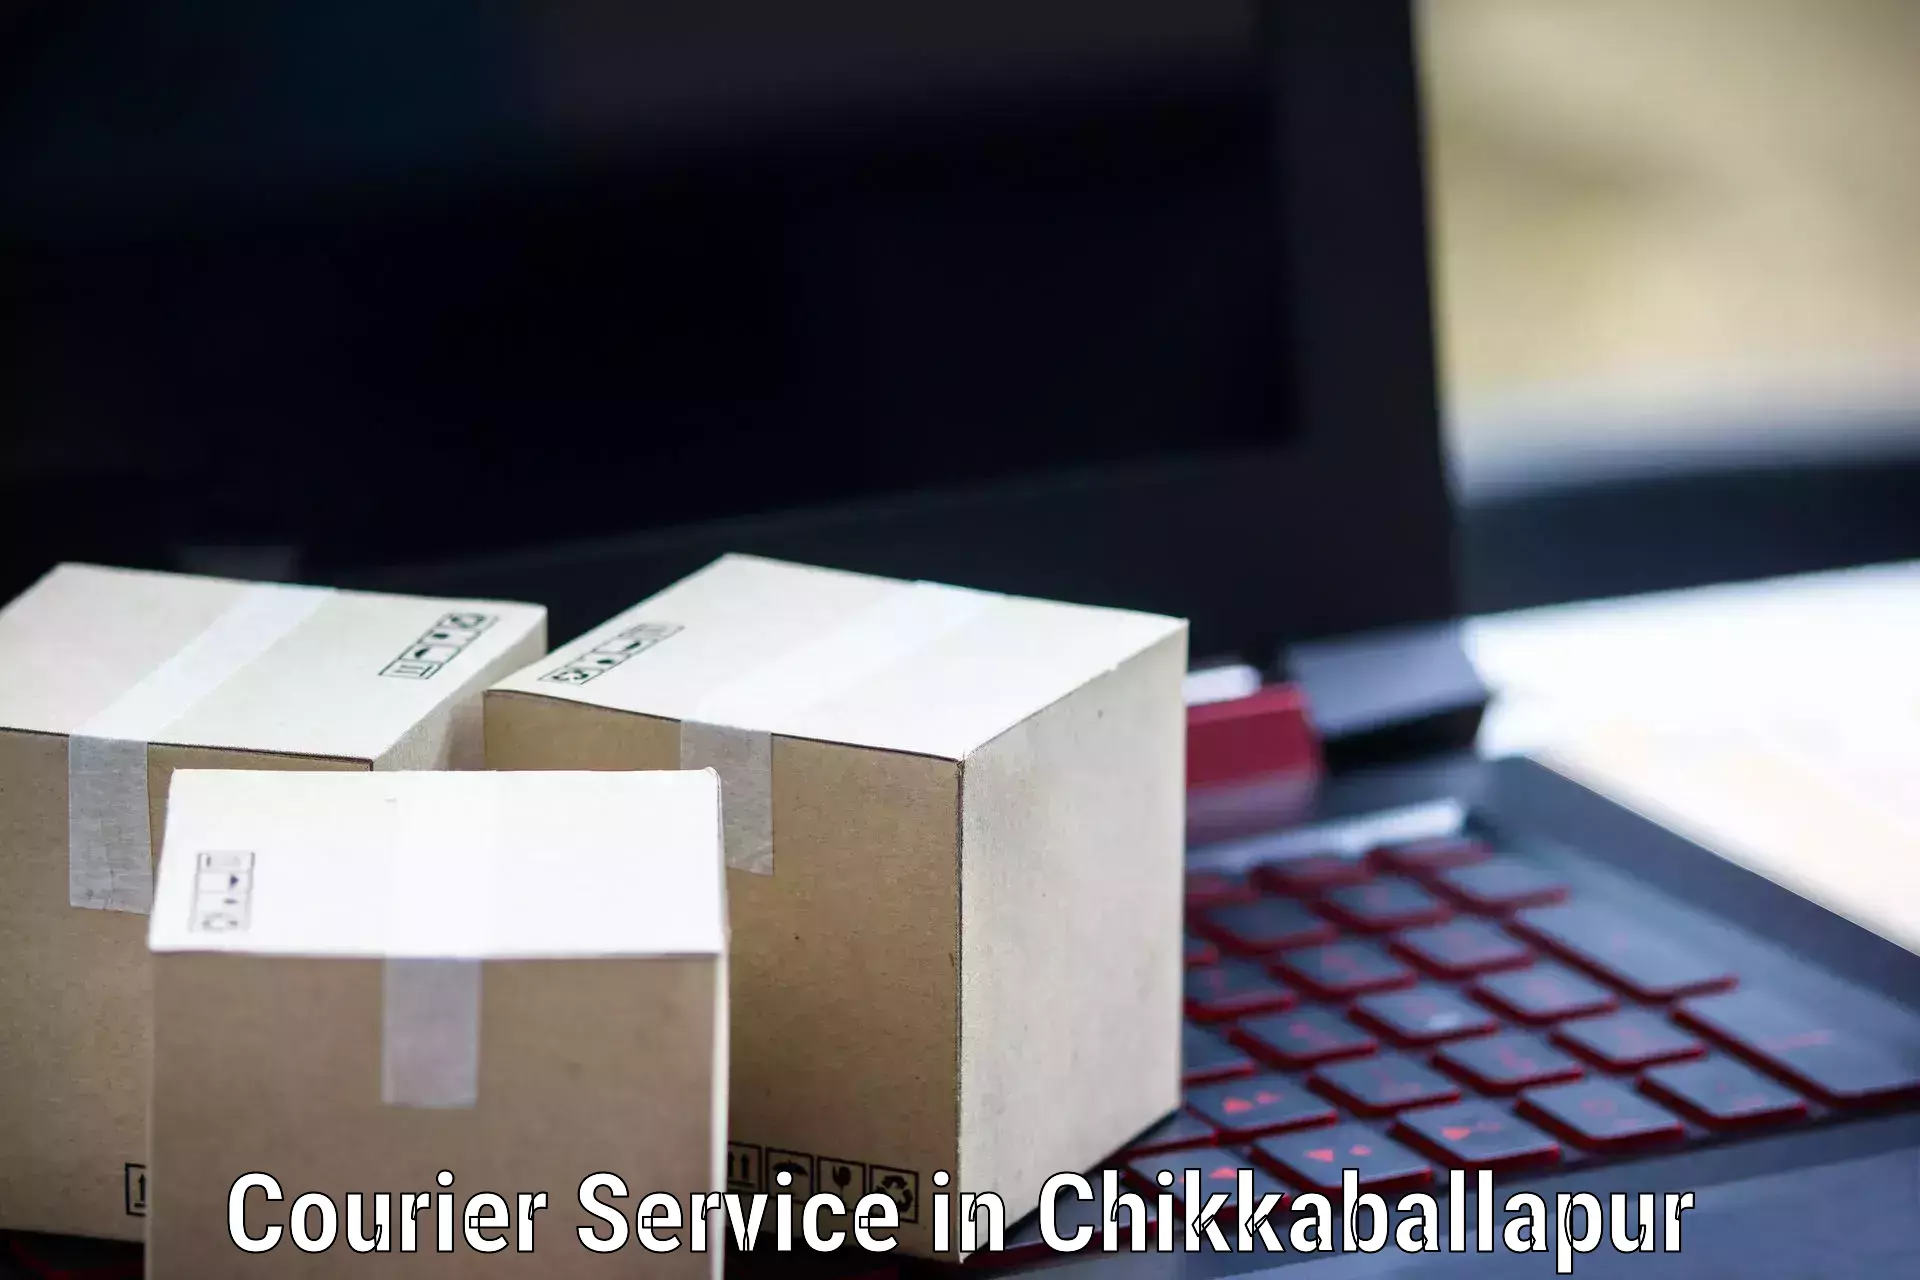 Fast-track shipping solutions in Chikkaballapur